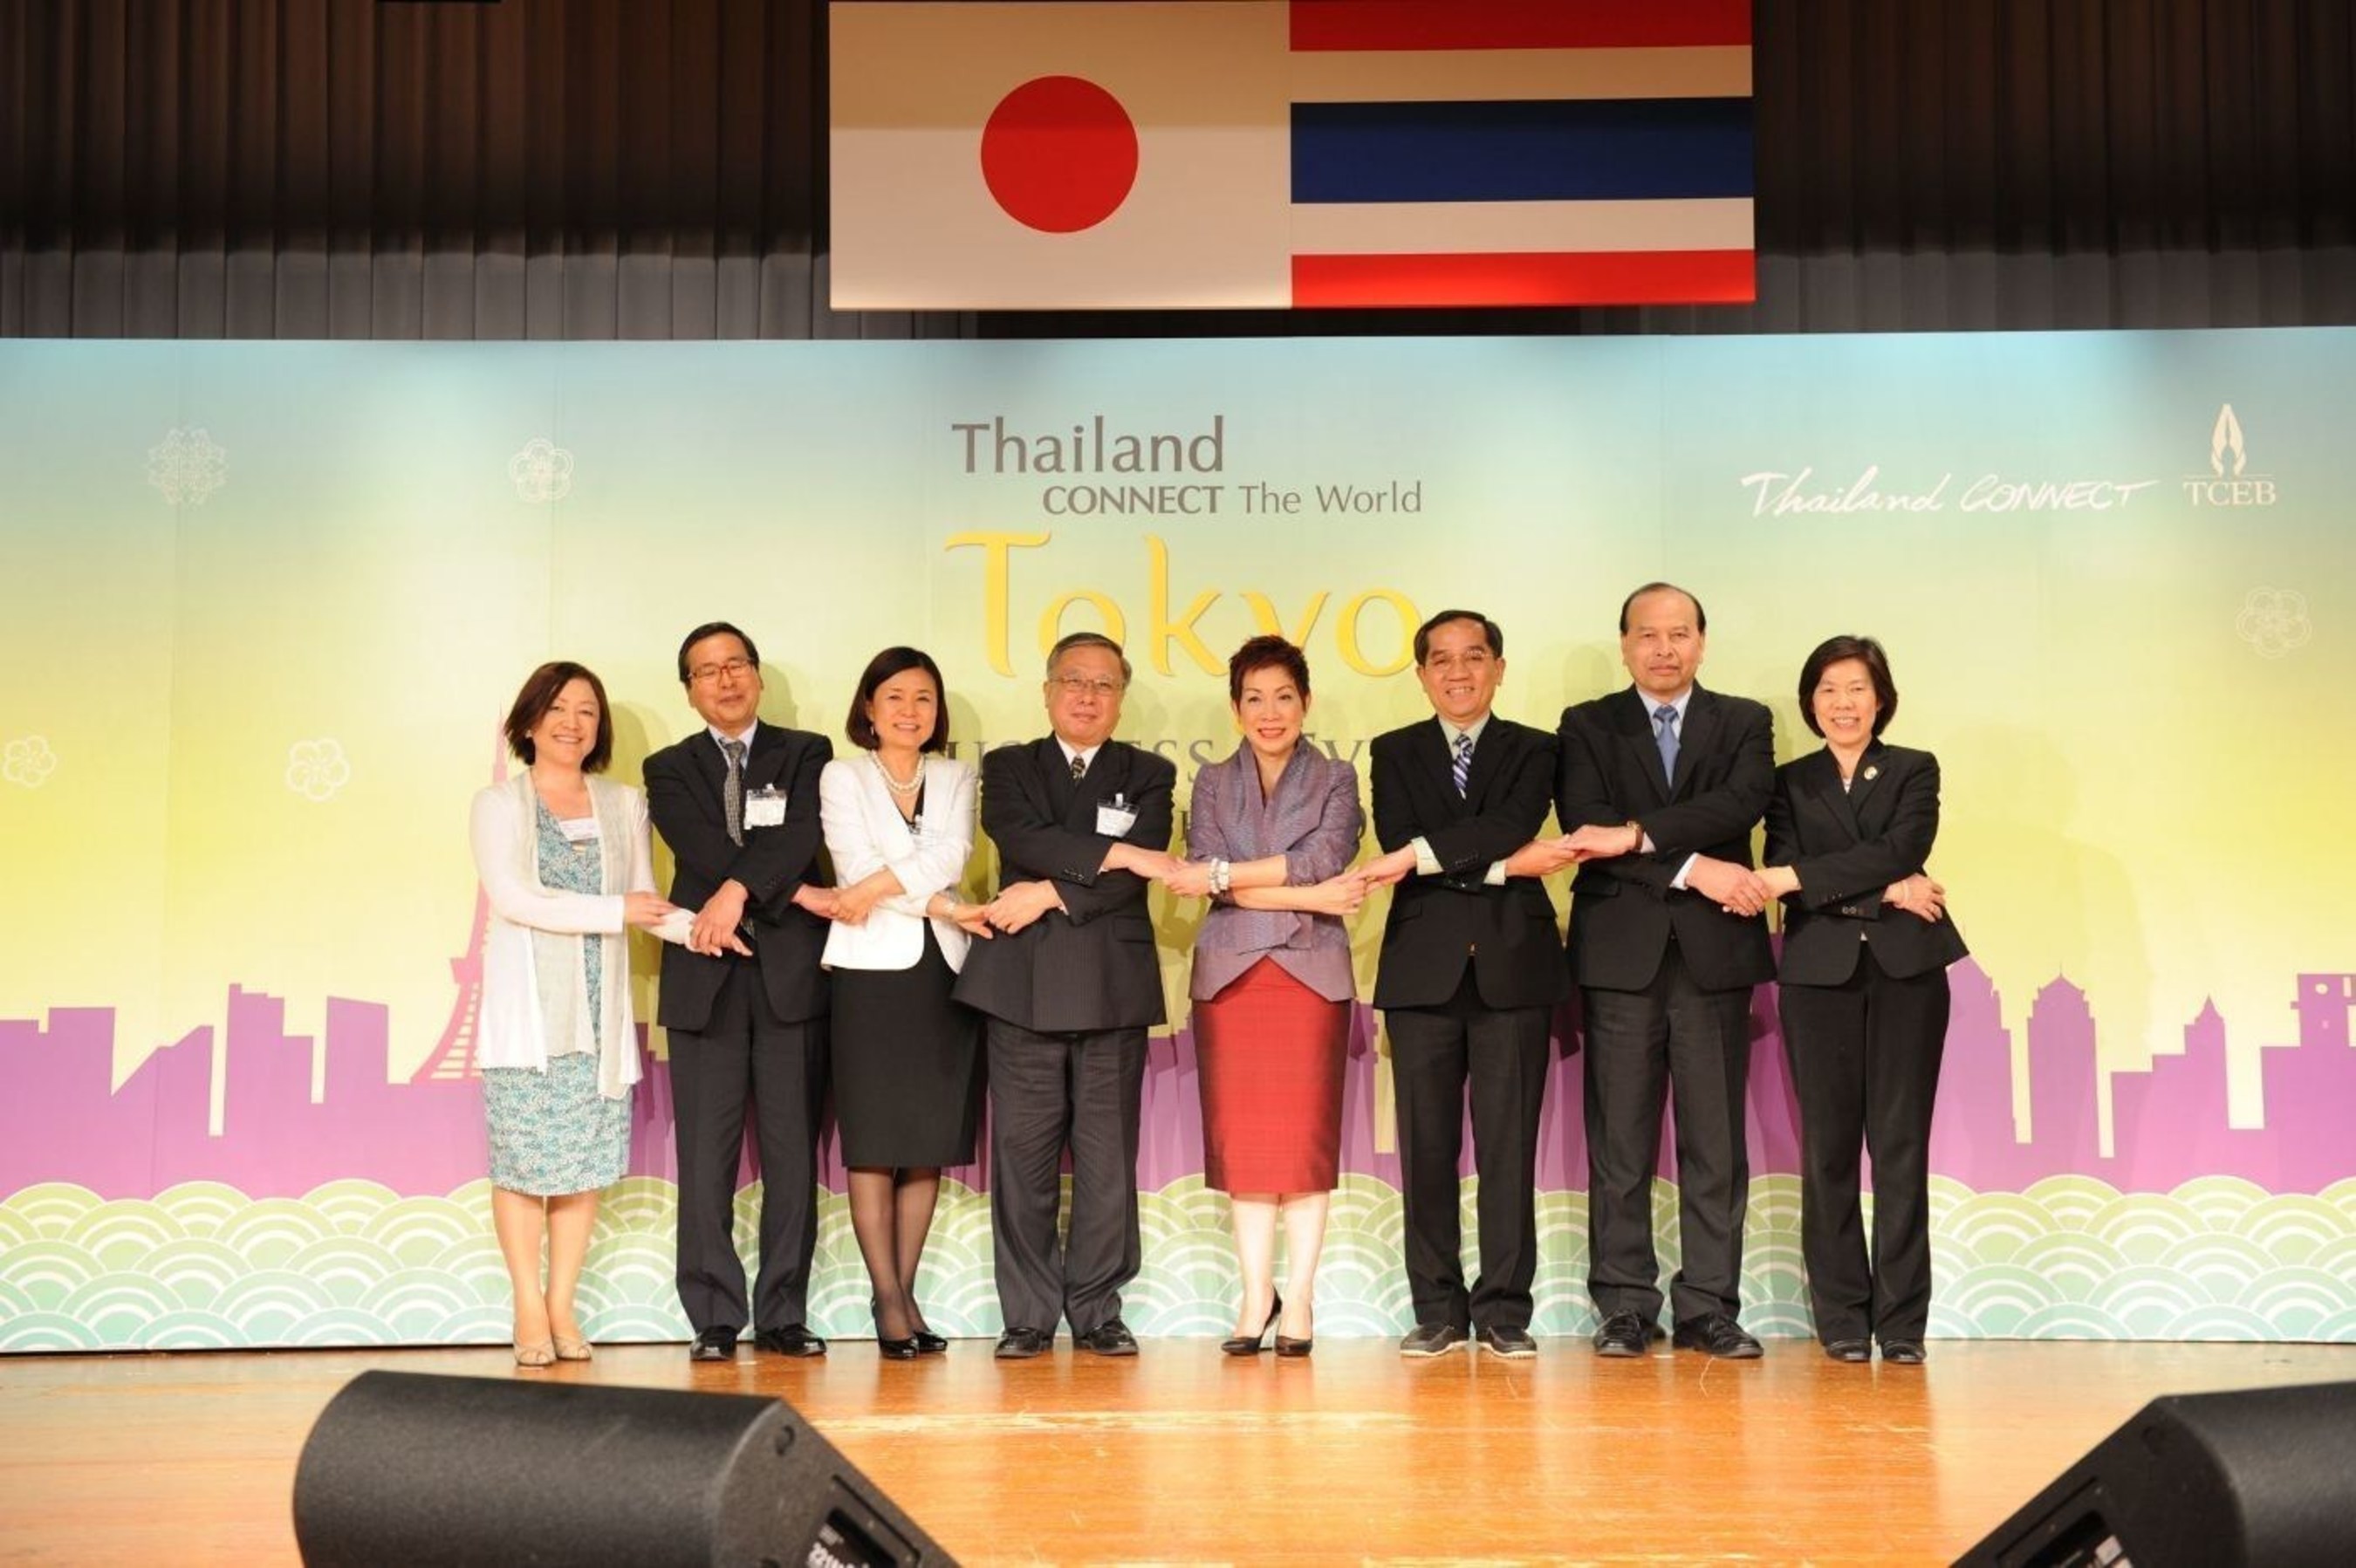 The Thailand Convention and Exhibition Bureau (Public Organization), has unveiled the next step in its strategy to boost confidence among Japanese business events stakeholders in Thailand’s MICE industry, positioning the country as a gateway to success in ASEAN. The bureau is spearheading both global initiatives including the Thailand CONNECT The World and Thailand’s MICE United II campaigns, and targeted initiatives for Japan.